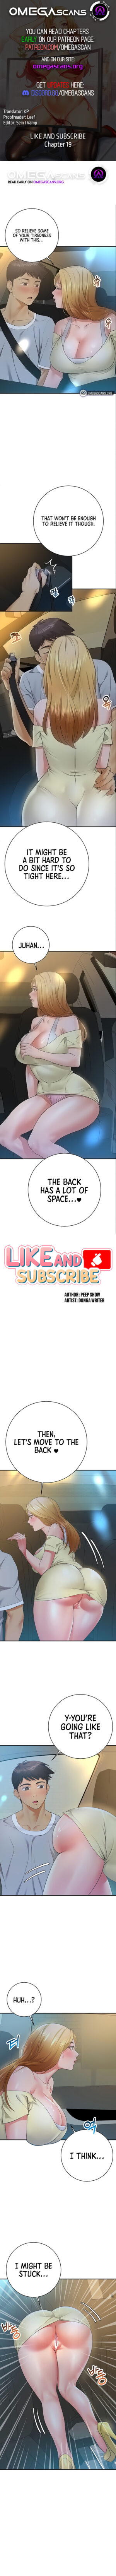 [Peep Show & DongA Writer] Like and Subscribe (1-30) [English] [Omega Scans] [Complete]